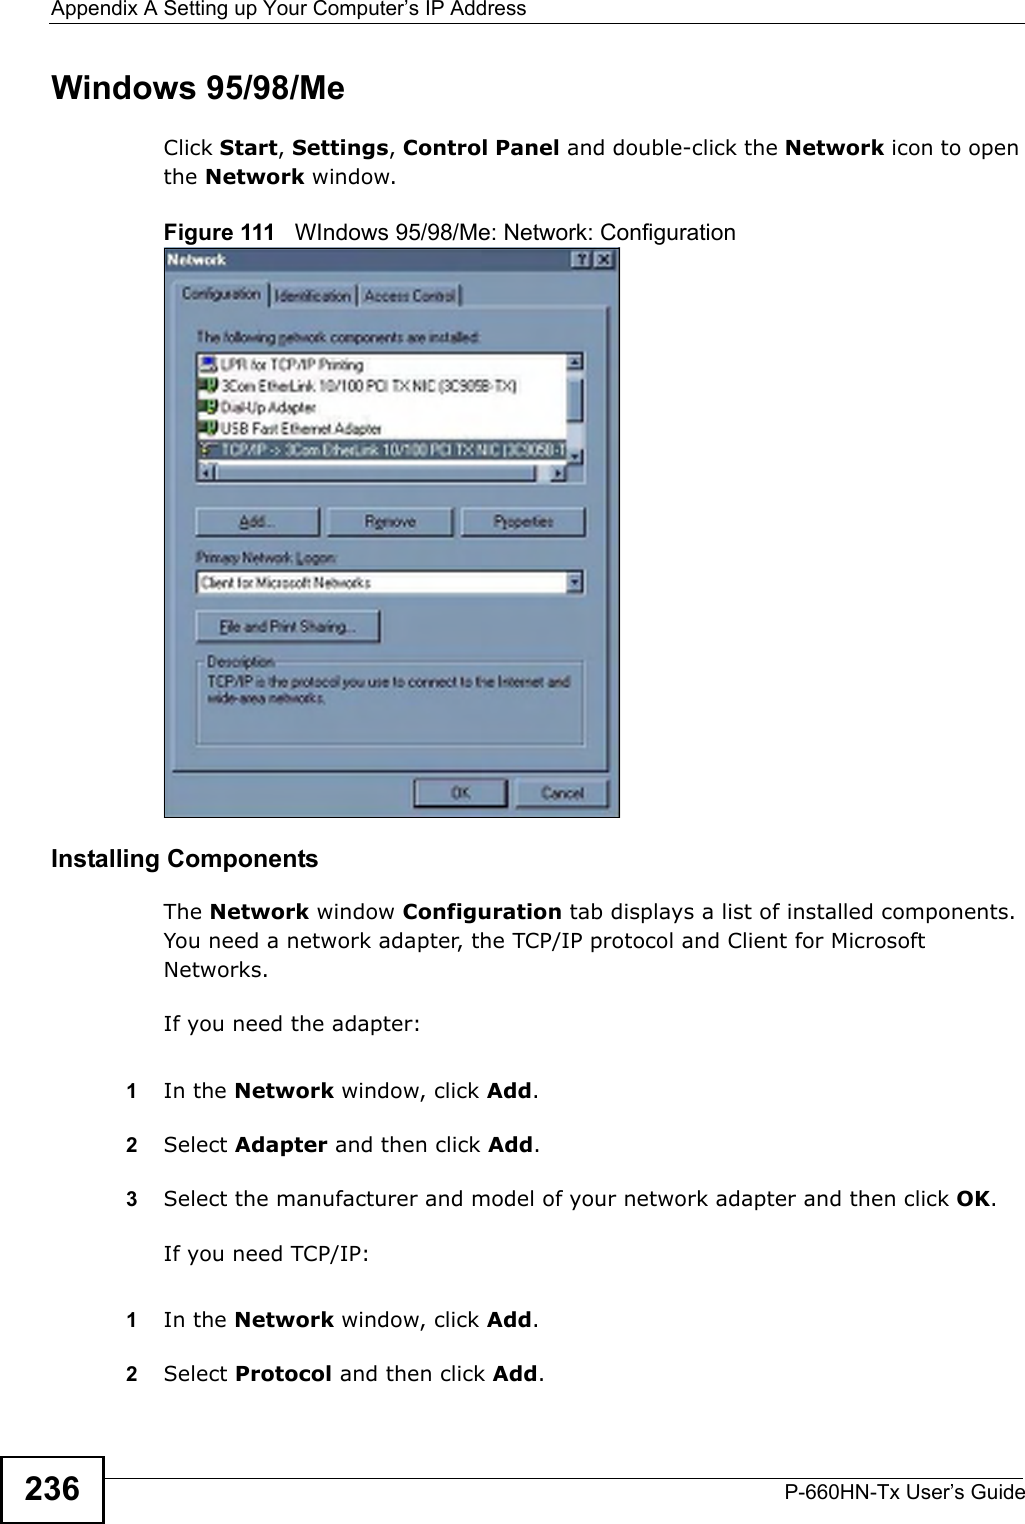 Appendix A Setting up Your Computer’s IP AddressP-660HN-Tx User’s Guide236Windows 95/98/MeClick Start, Settings, Control Panel and double-click the Network icon to open the Network window.Figure 111   WIndows 95/98/Me: Network: ConfigurationInstalling ComponentsThe Network window Configuration tab displays a list of installed components. You need a network adapter, the TCP/IP protocol and Client for Microsoft Networks.If you need the adapter:1In the Network window, click Add.2Select Adapter and then click Add.3Select the manufacturer and model of your network adapter and then click OK.If you need TCP/IP:1In the Network window, click Add.2Select Protocol and then click Add.